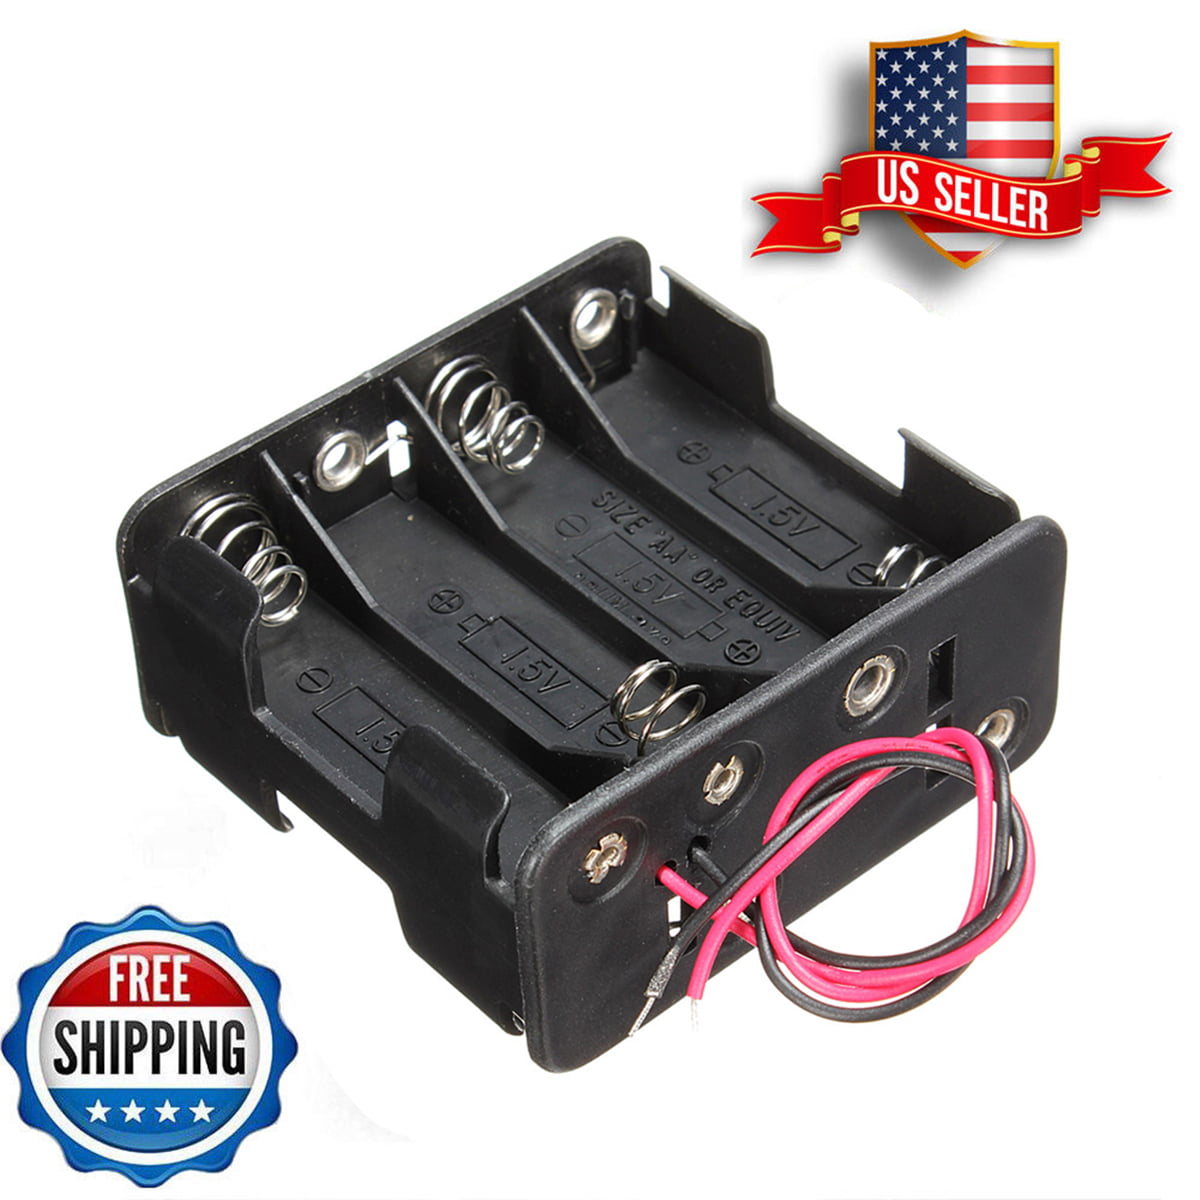 Battery Holder Dual-side 4-AA Cells Case Box With 6" Cable Leads